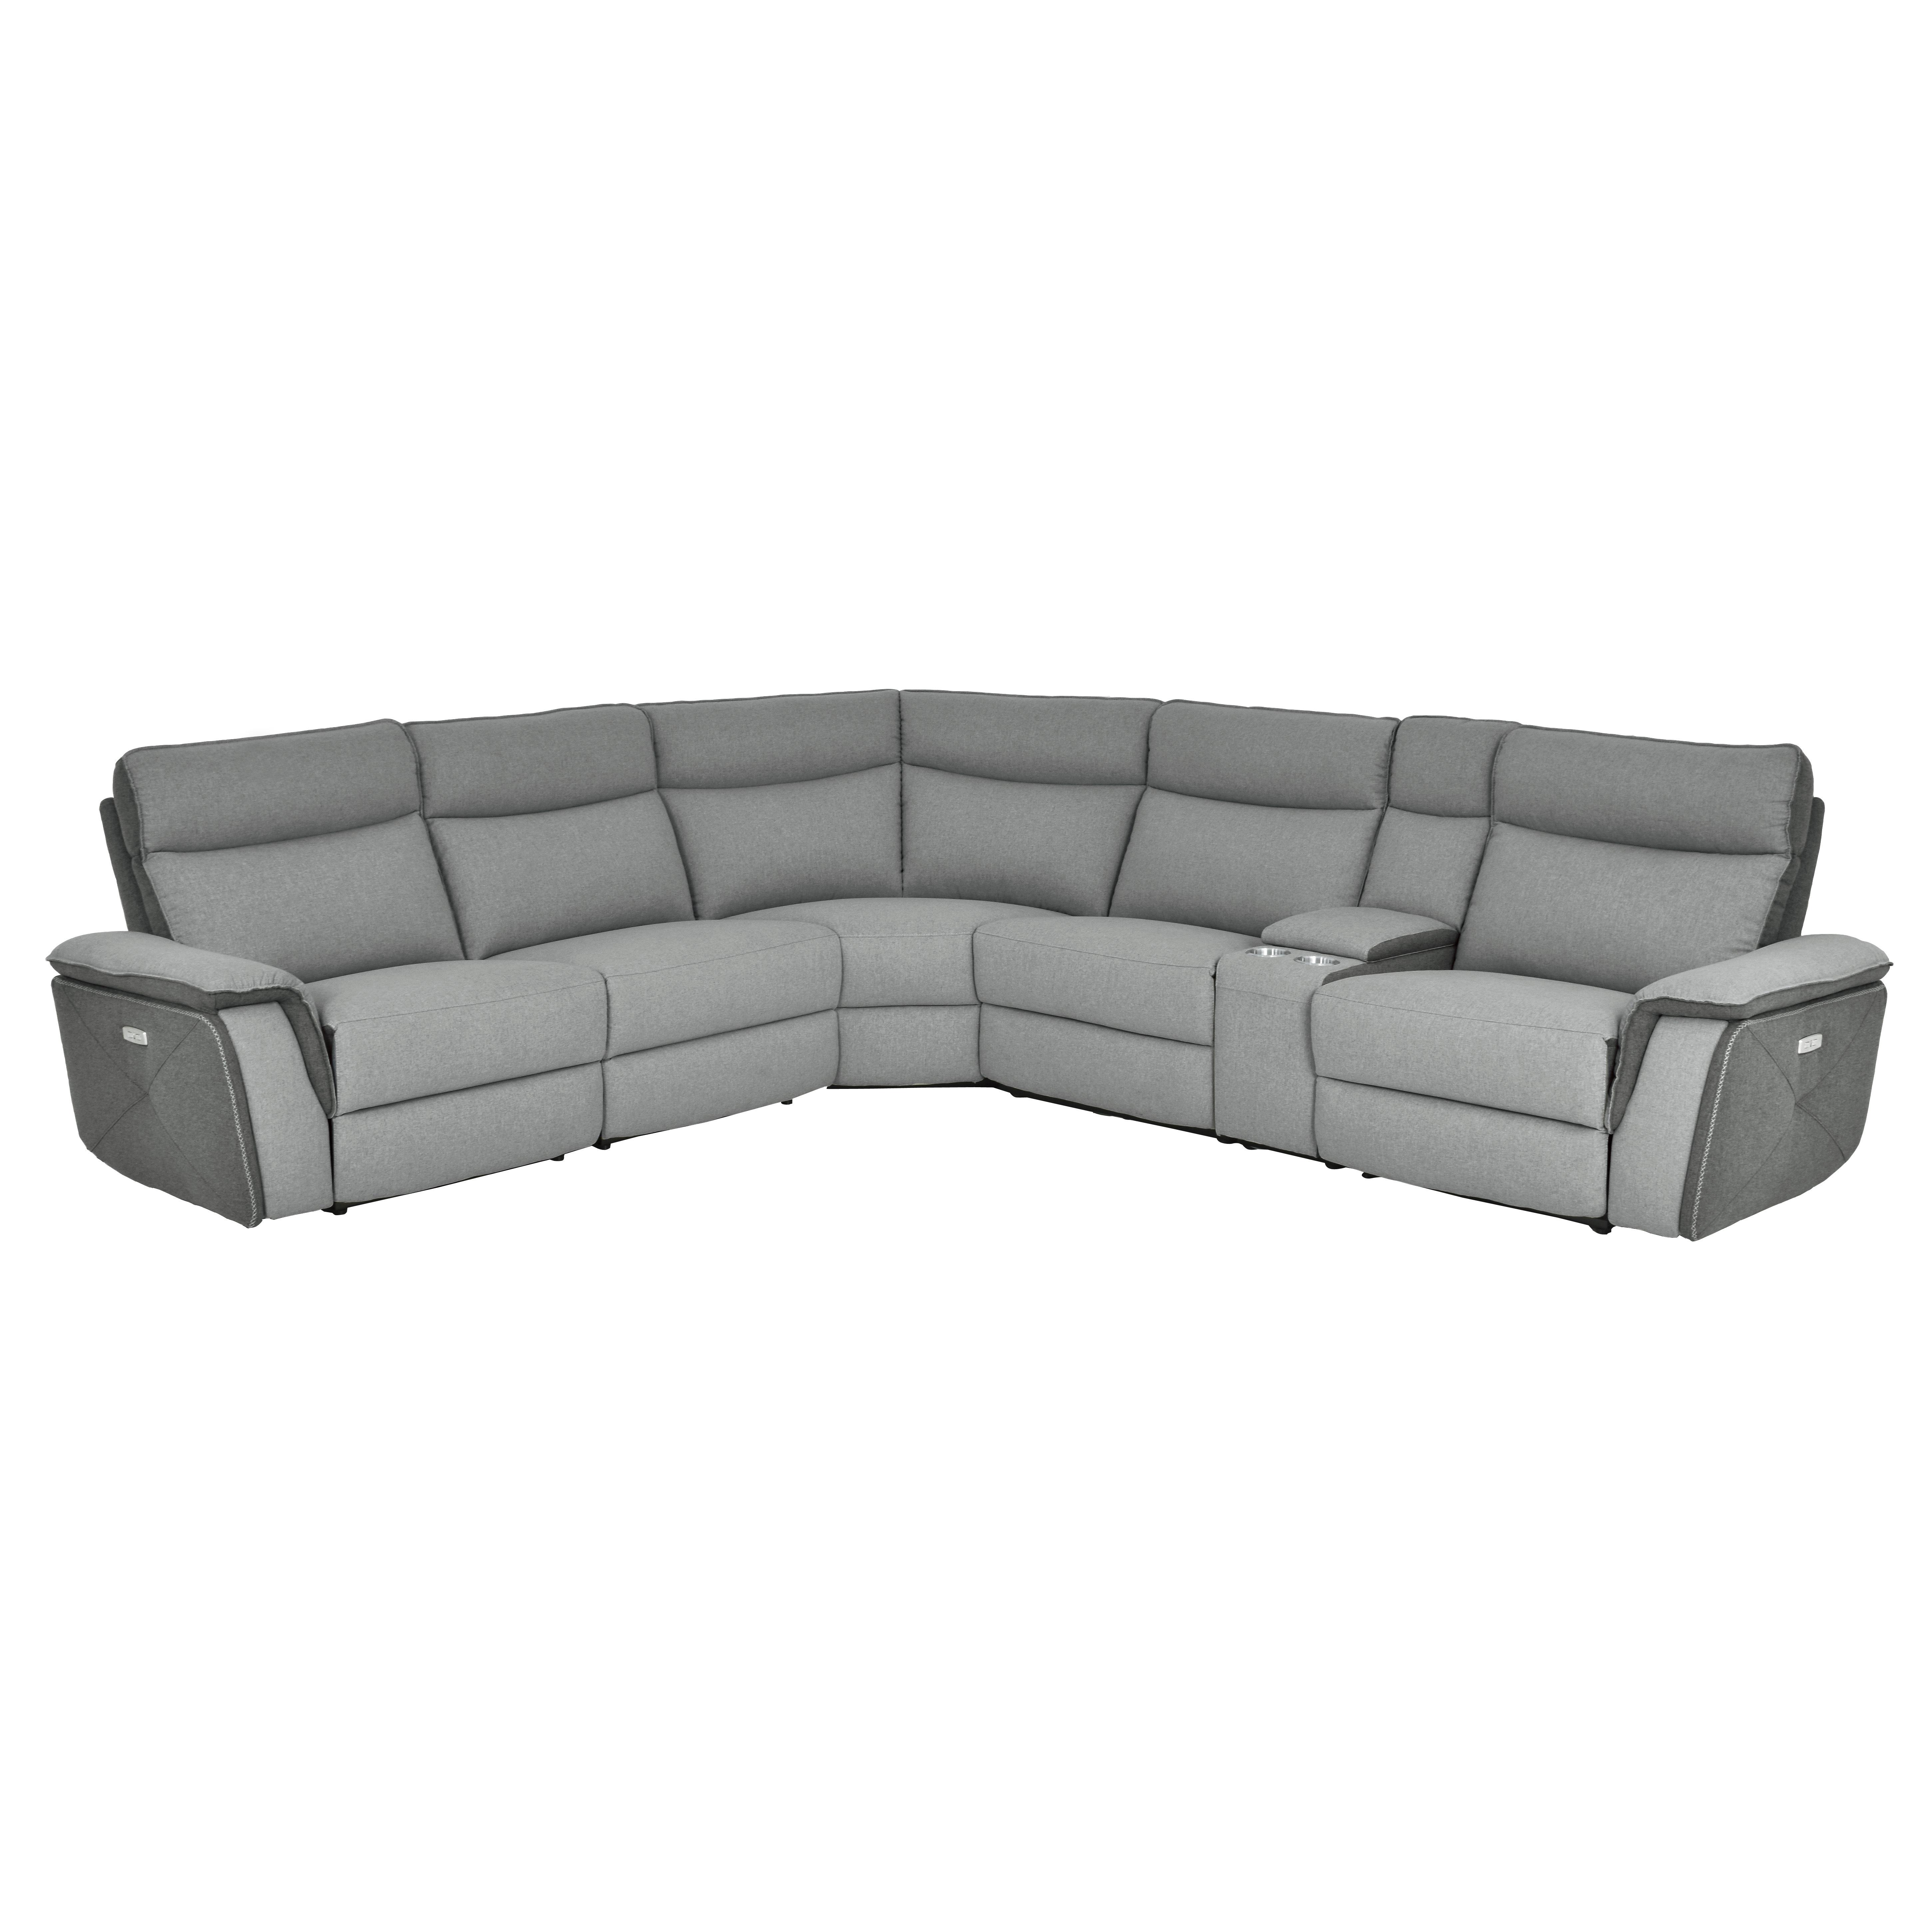 Classic Power Reclining Sectional 8259*6SCPWH Maroni 8259*6SCPWH in Gray 